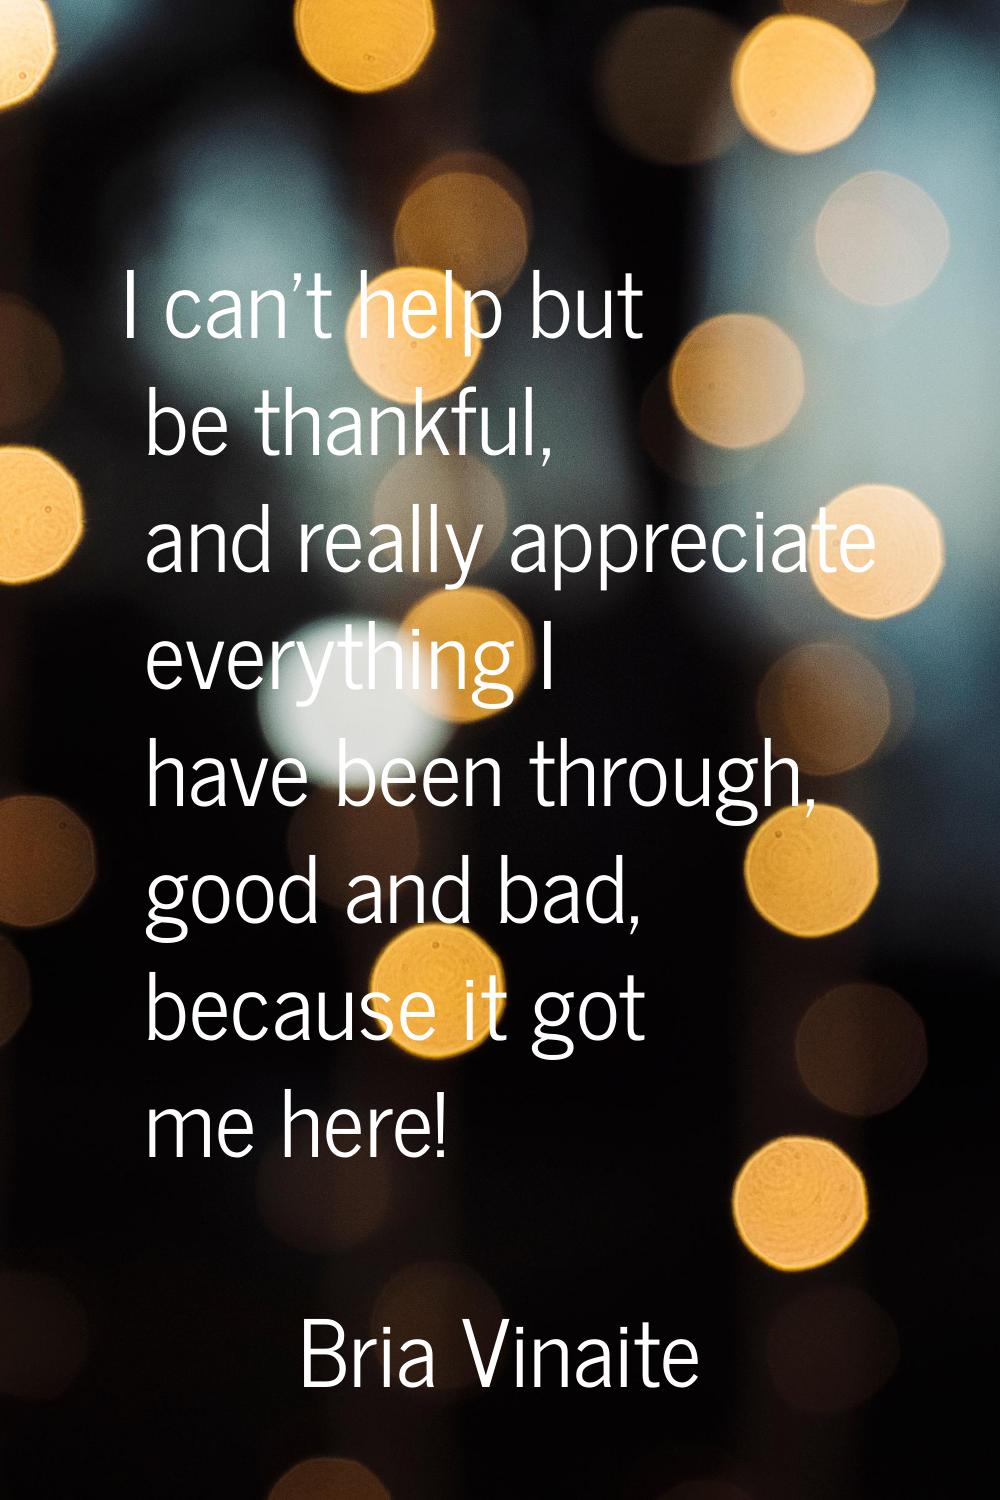 I can't help but be thankful, and really appreciate everything I have been through, good and bad, b